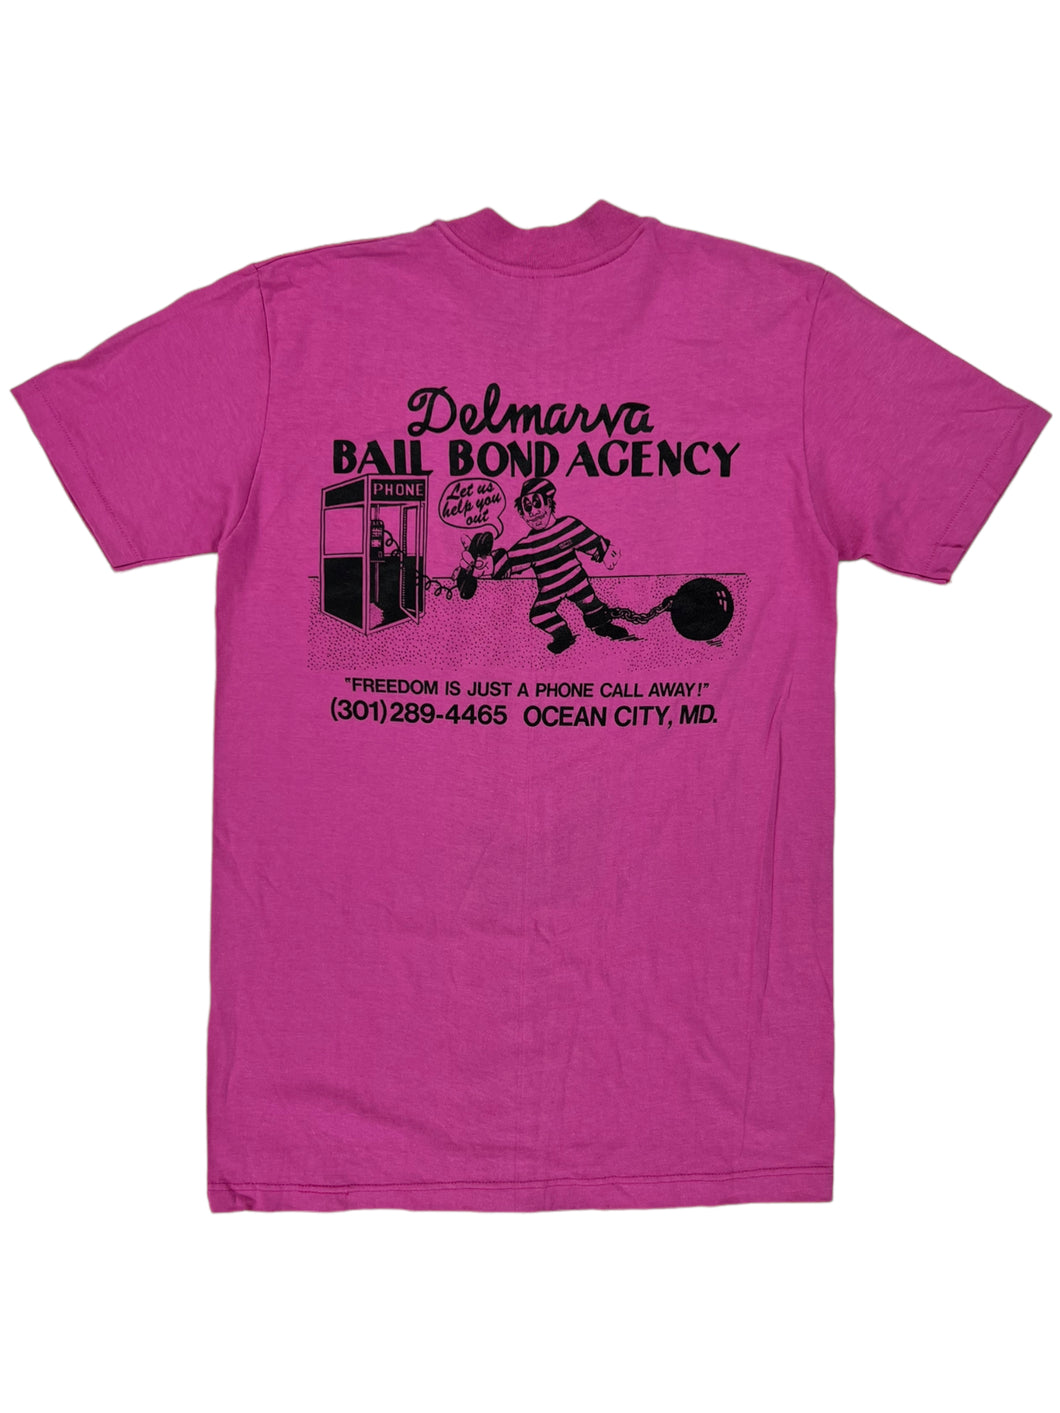 Vintage 80s Stedman Delmarva  Bail Bond Agency  “Freedom is just a phone call away” pink pocket tee (M)